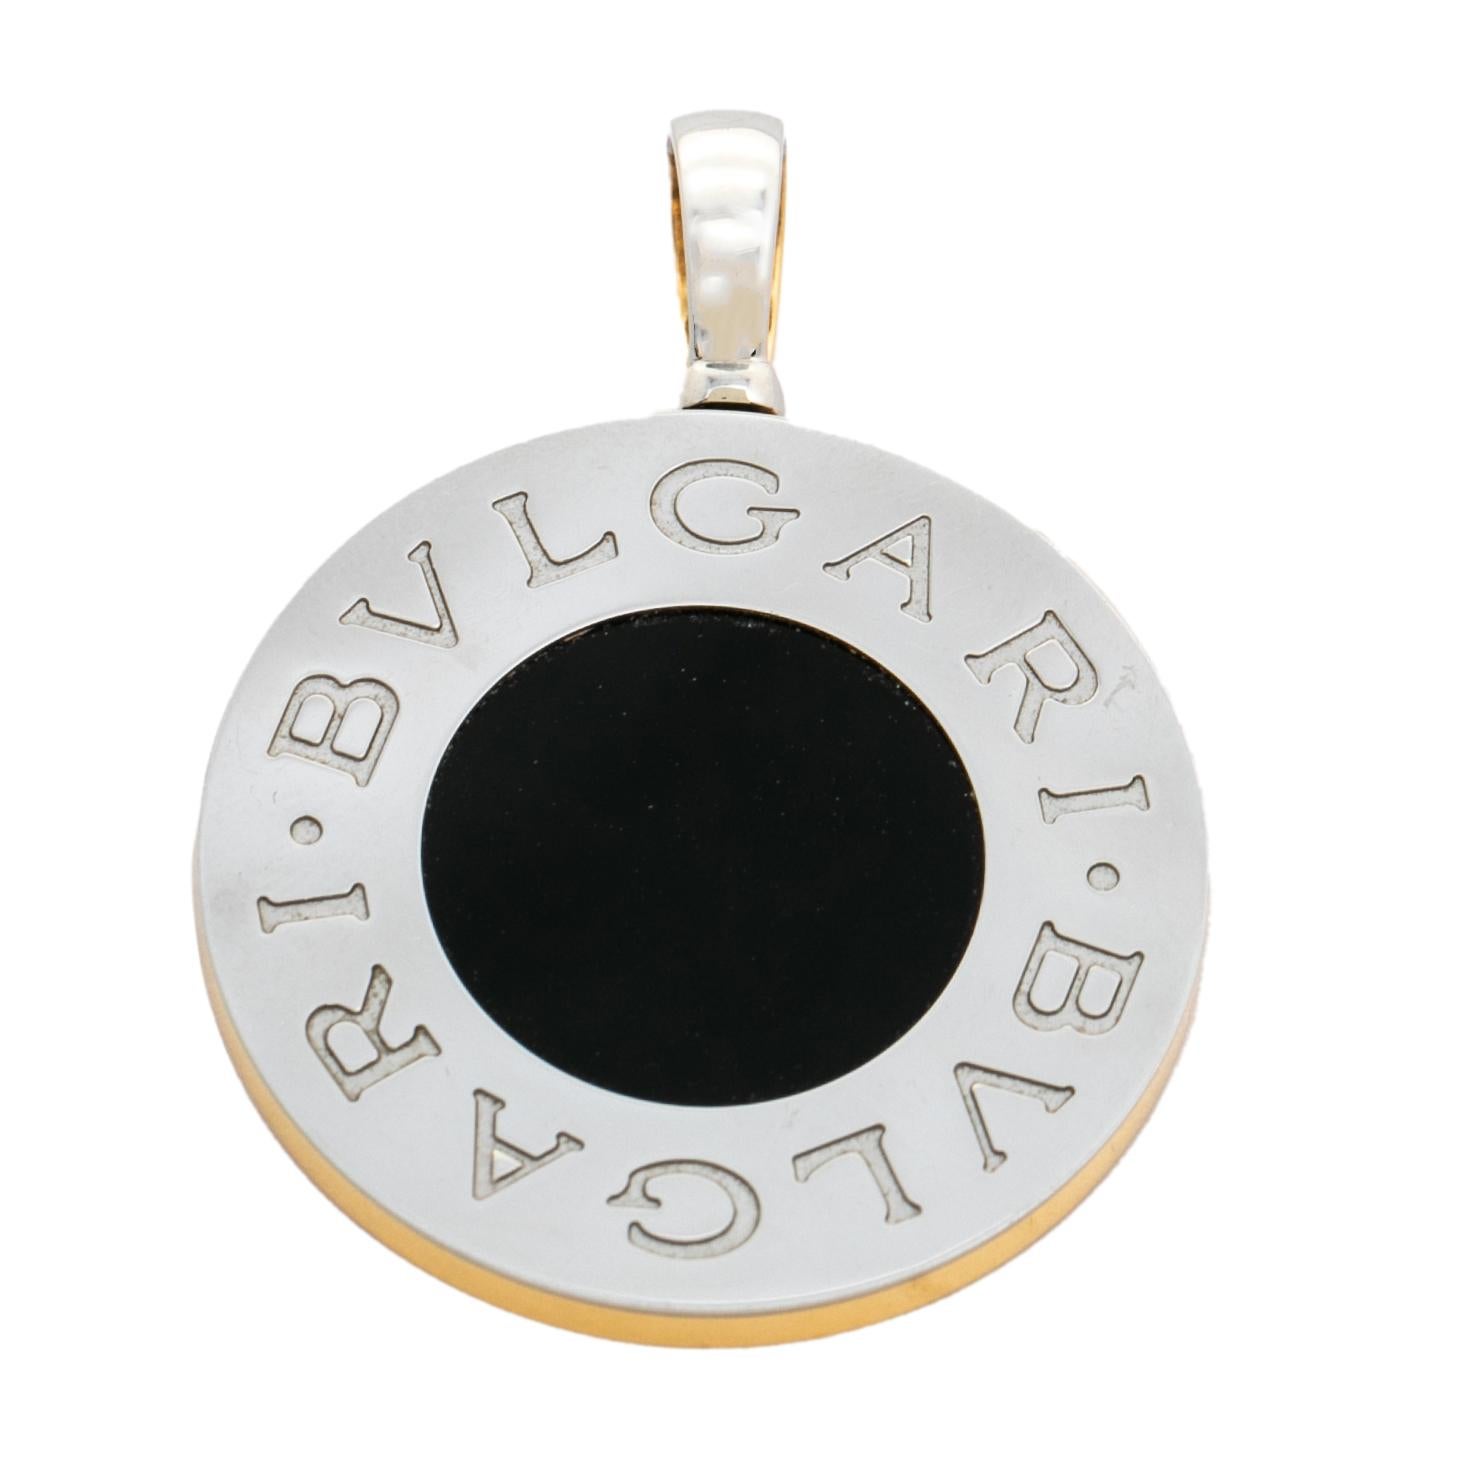 Highlight your neckline with this one-of-a-kind pendant from Bvlgari. Designed in a basic round shape, this pendant comes with onyx laid on the stainless steel side and Mother of Pearl on the 18k yellow gold side, giving both sides a luxe finish.